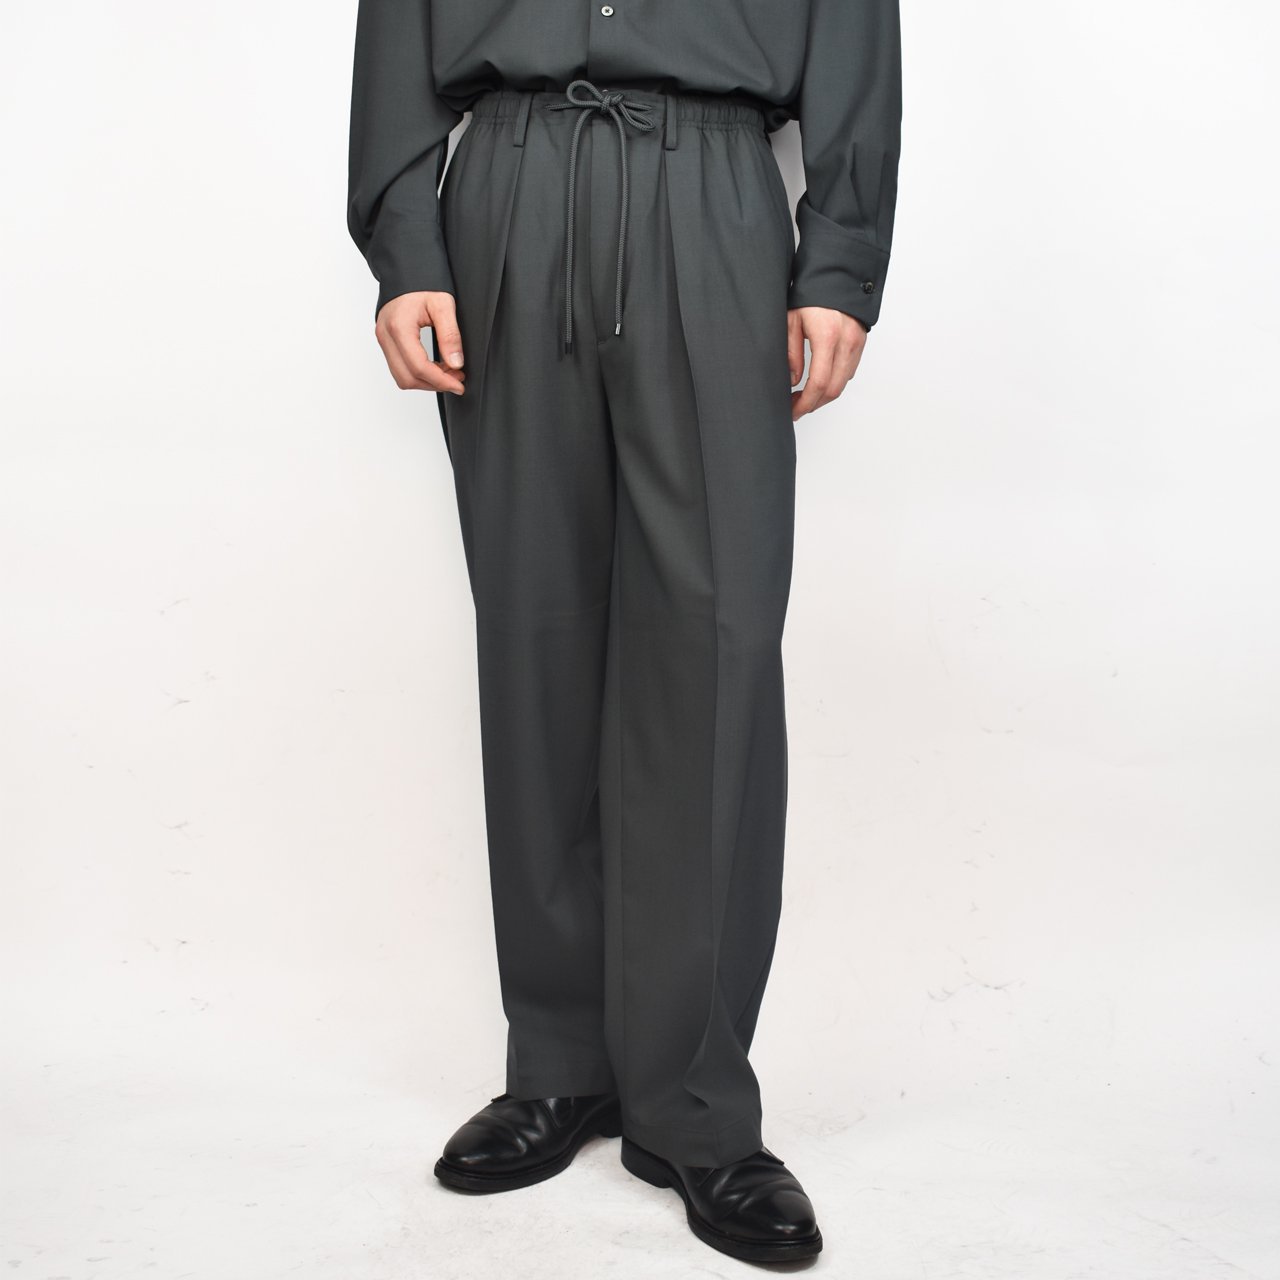 <img class='new_mark_img1' src='https://img.shop-pro.jp/img/new/icons5.gif' style='border:none;display:inline;margin:0px;padding:0px;width:auto;' />MARKAWARE (ޡ)CLASSIC FIT EASY PANTS OLIVE -ORGANIC WOOL 2/80 TROPICAL-